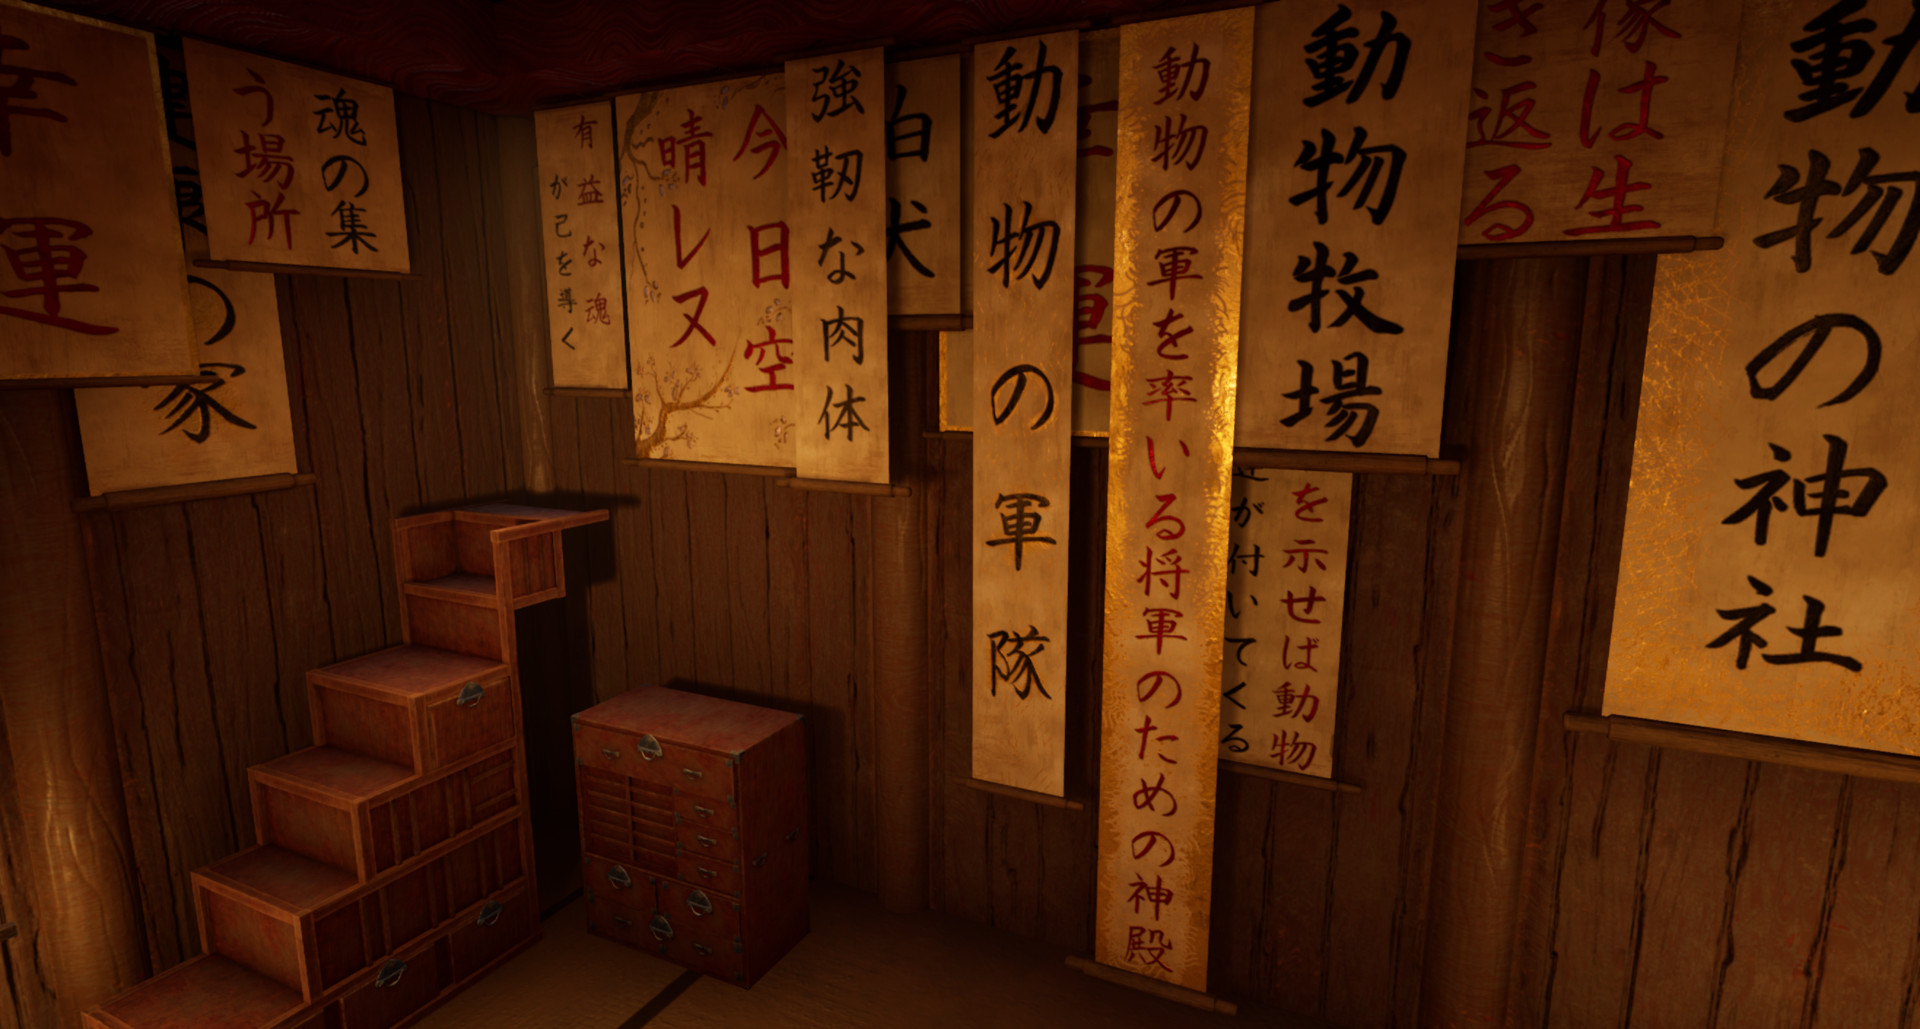 Another angle from Unreal 4 showing the calligraphers interior. Lots and lots of scrolls hanging from the walls, now seen in a close up with the gold leaf texture details and hand paints more obvious.